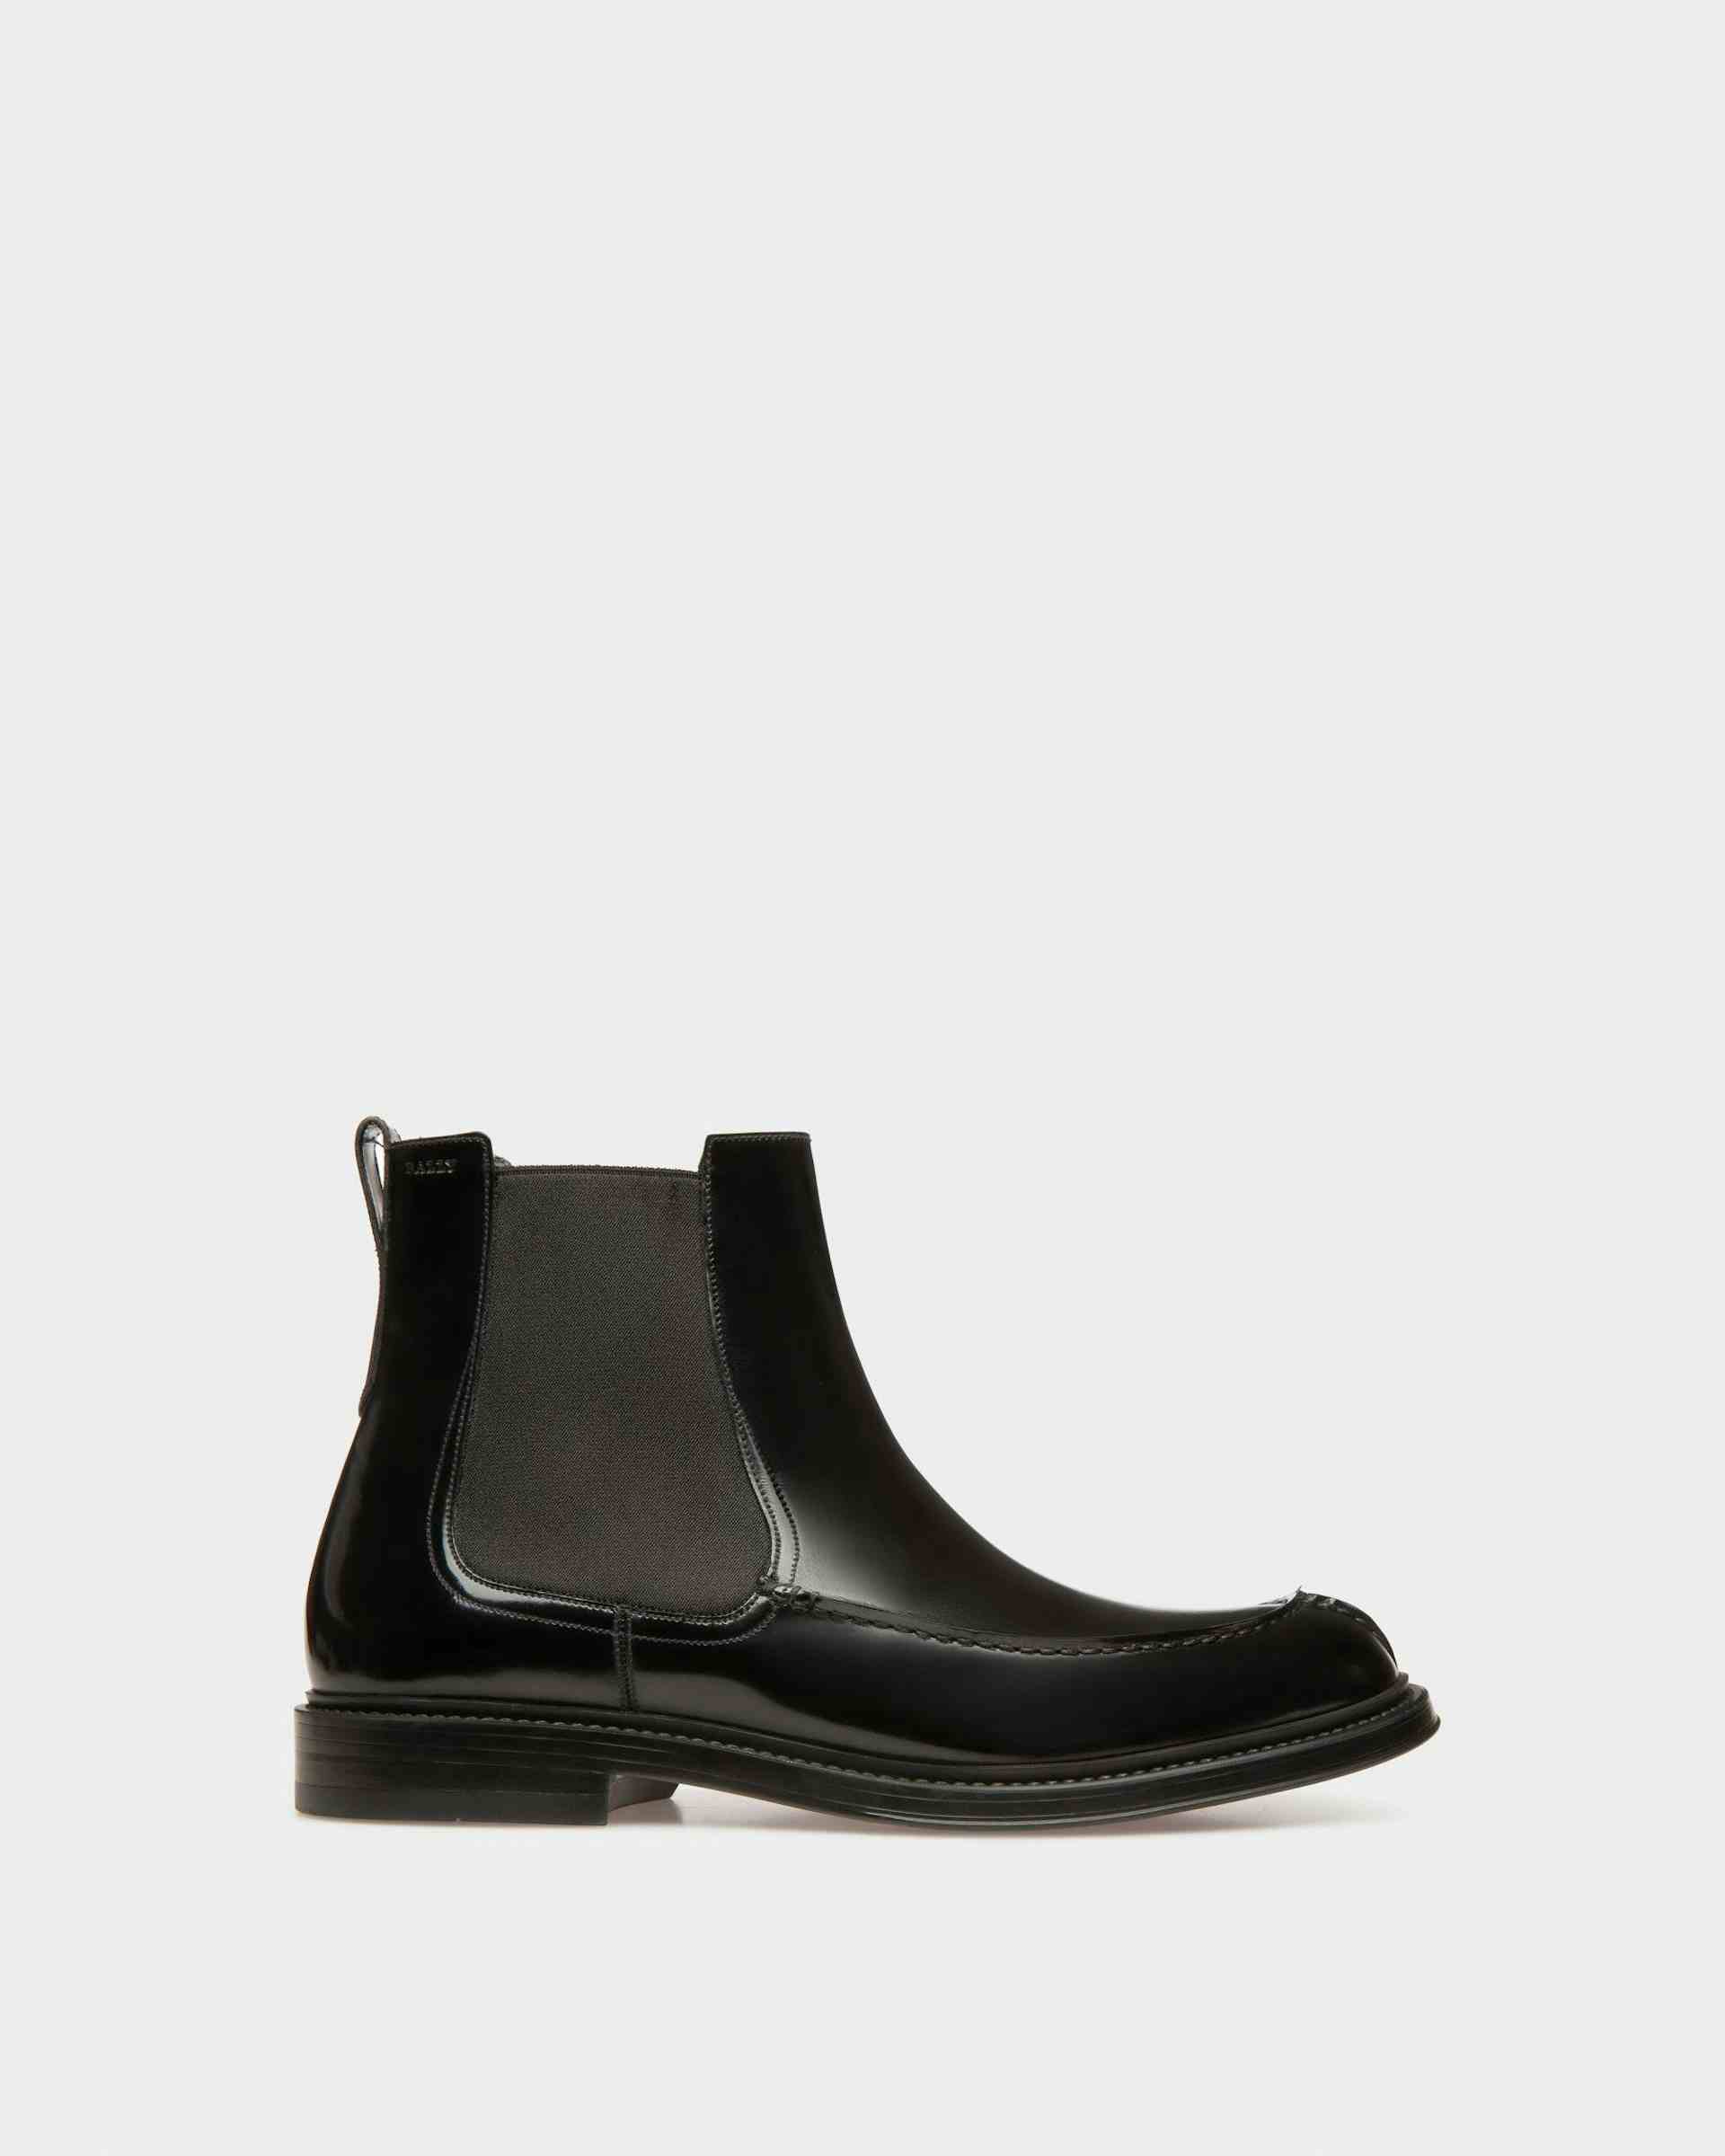 Nidro Leather Boots In Black - Men's - Bally